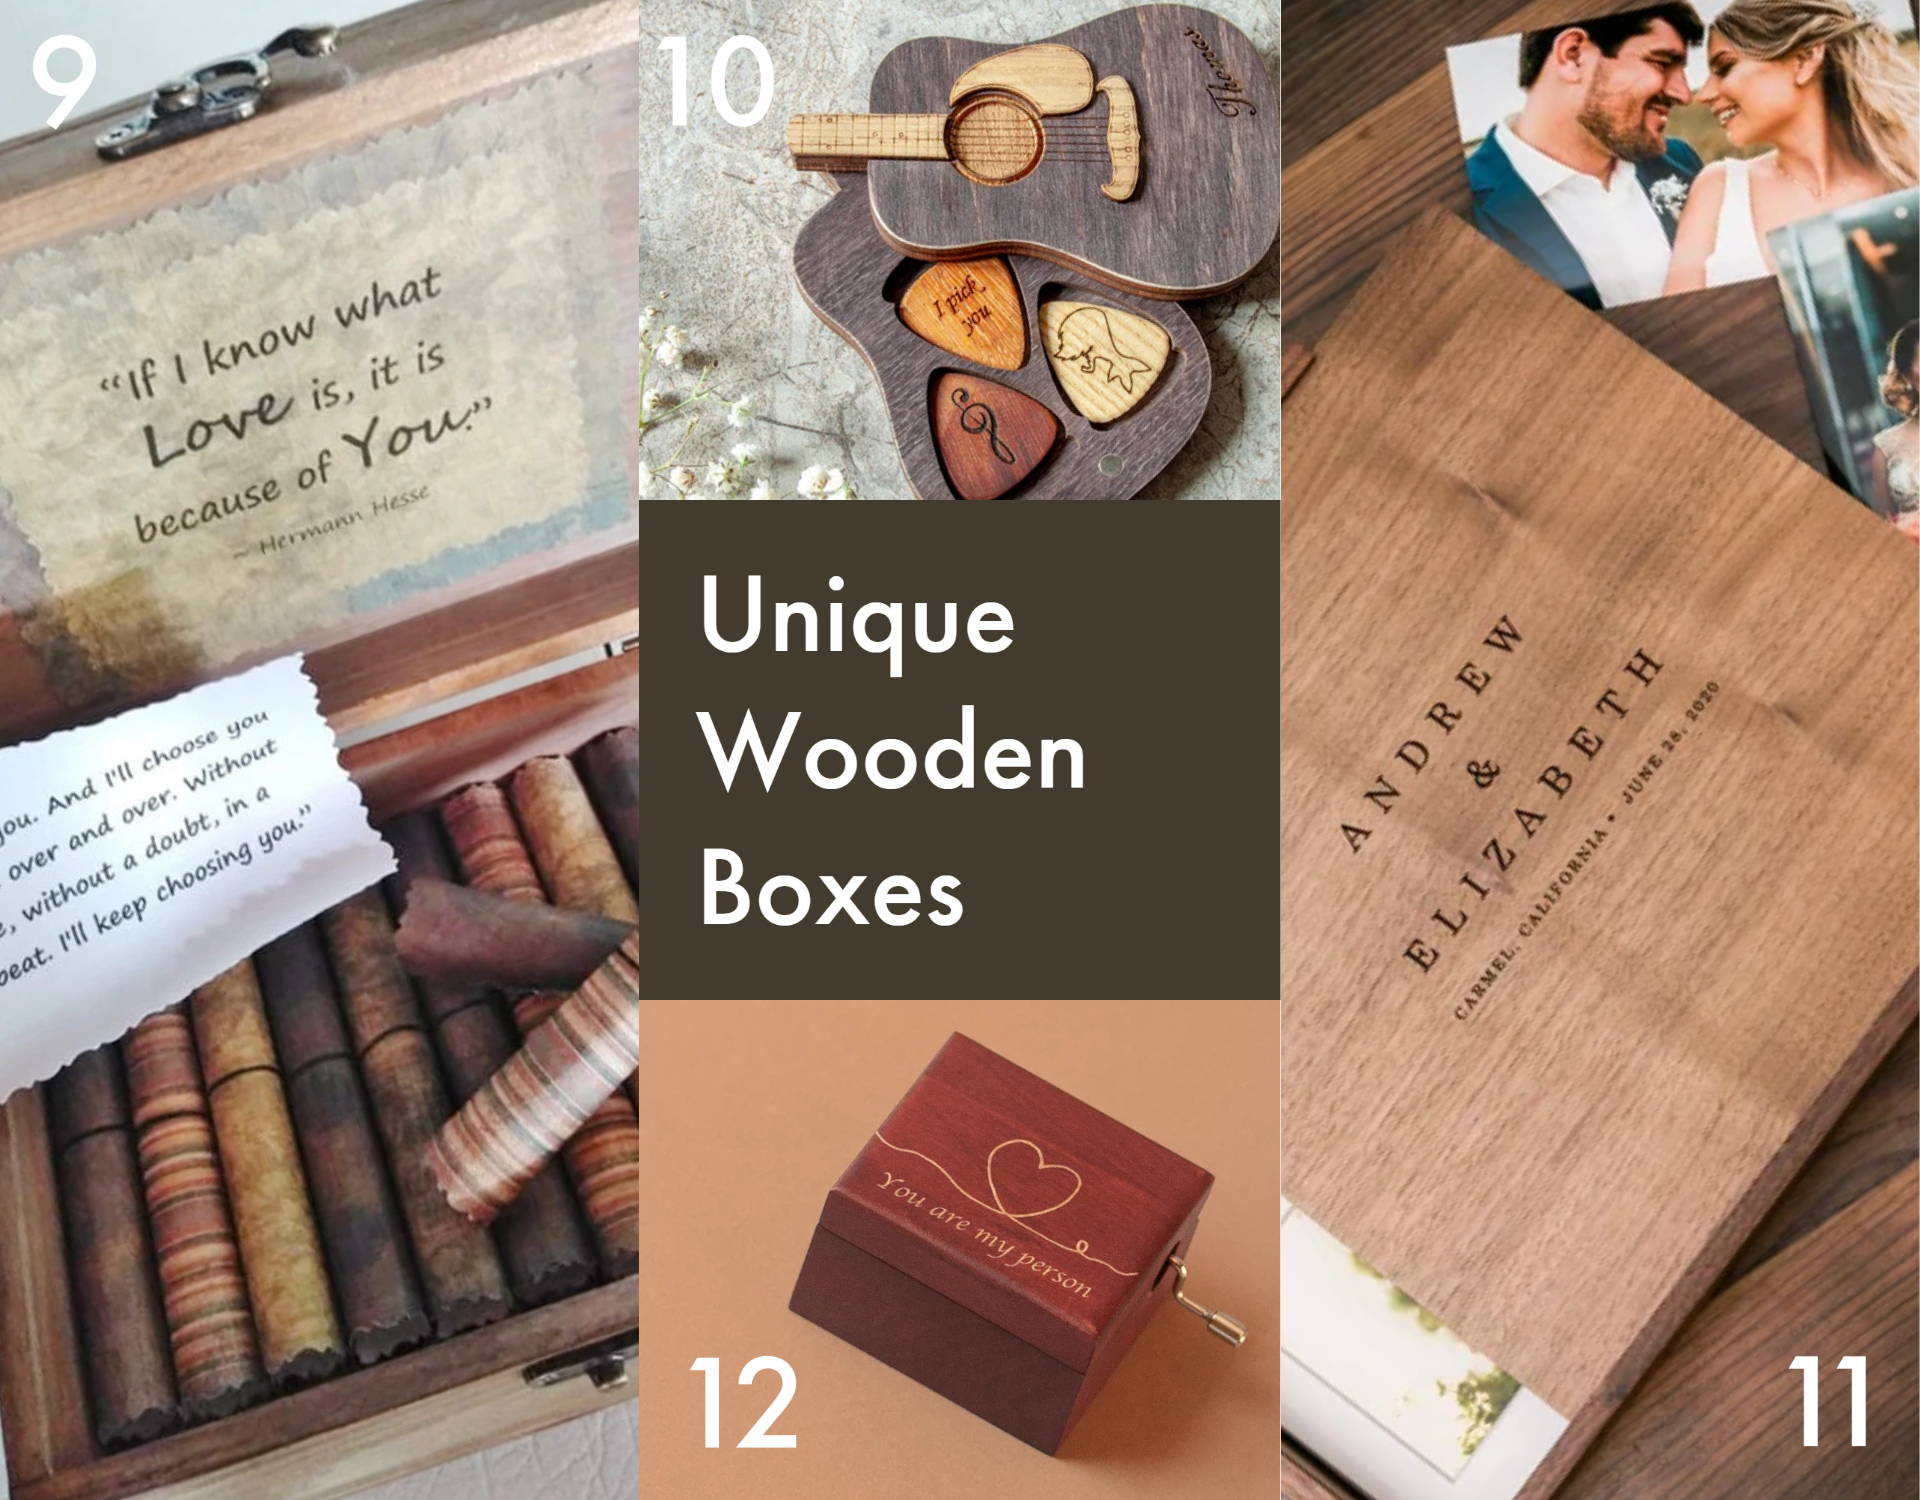 Wooden Boxes for Five Year Anniversary Gift